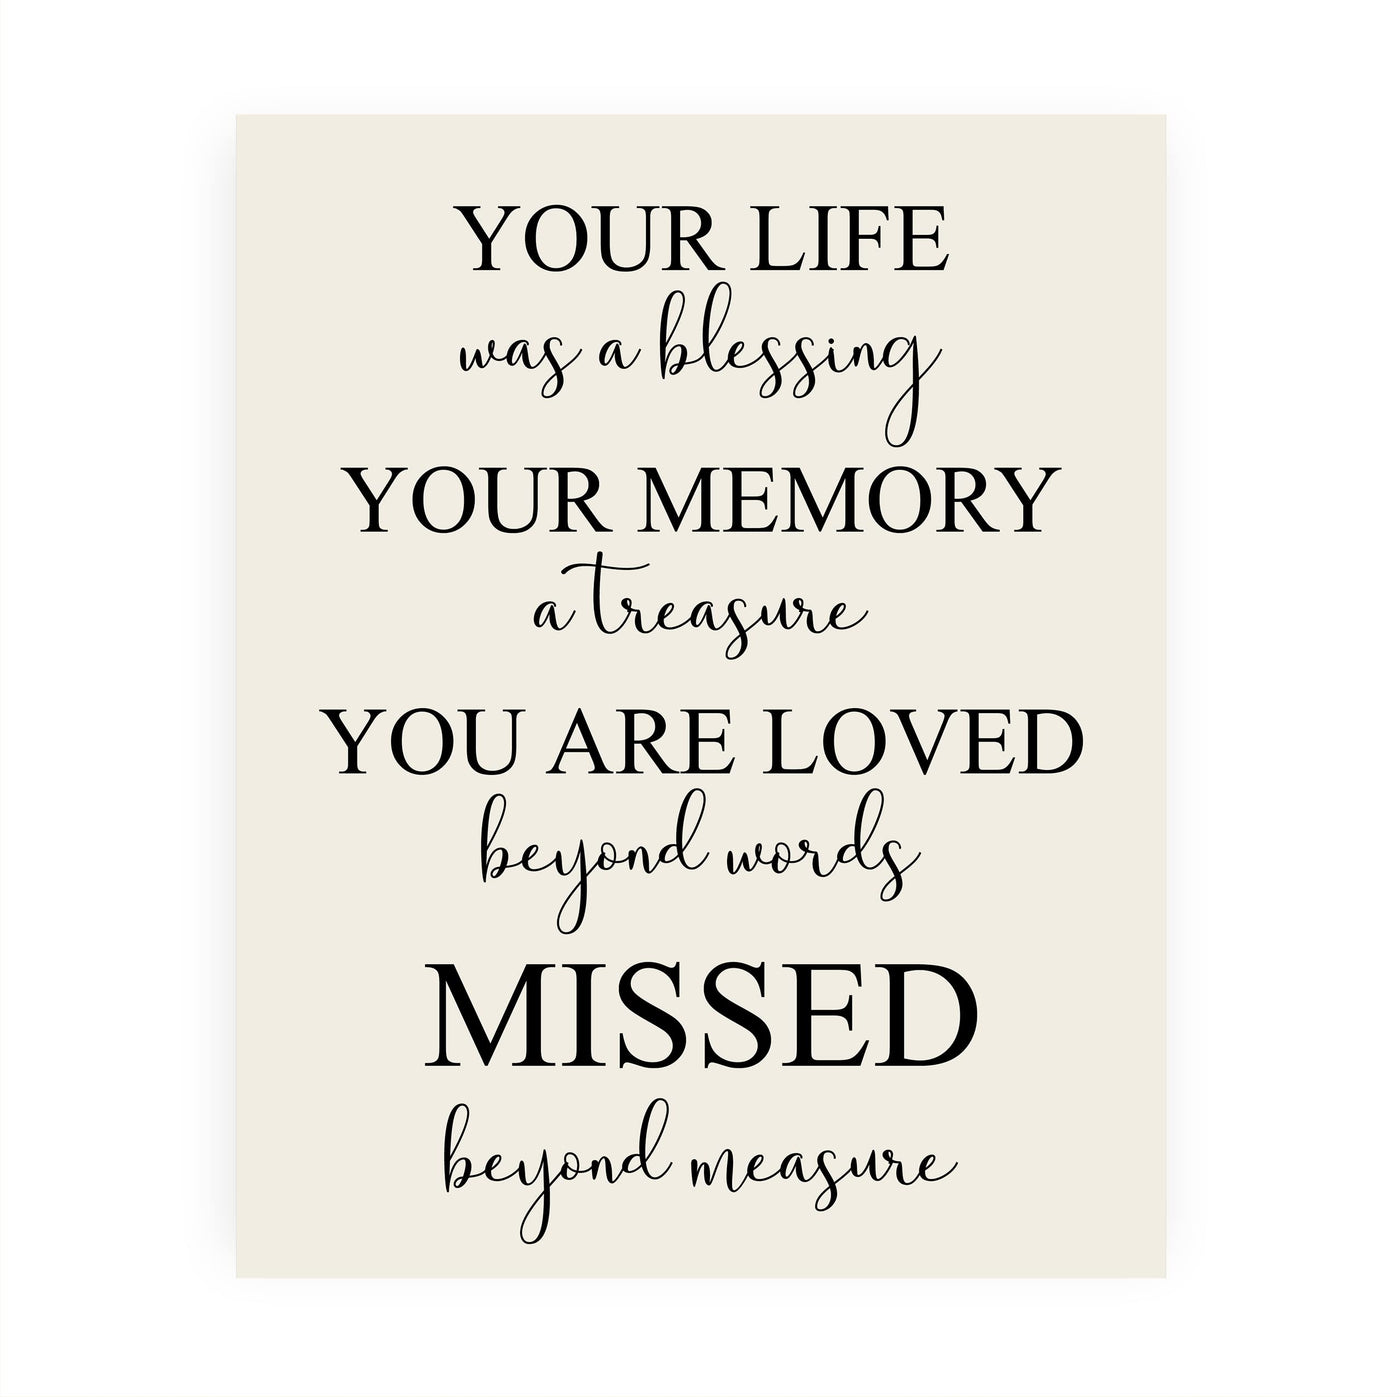 Your Life Was a Blessing Inspirational Quotes - Memorial Wall Art -8 x10" Loving Sympathy Poster Print -Ready to Frame. Home-Office-Spiritual-Christian Decor. Perfect Keepsake Gift of Remembrance!